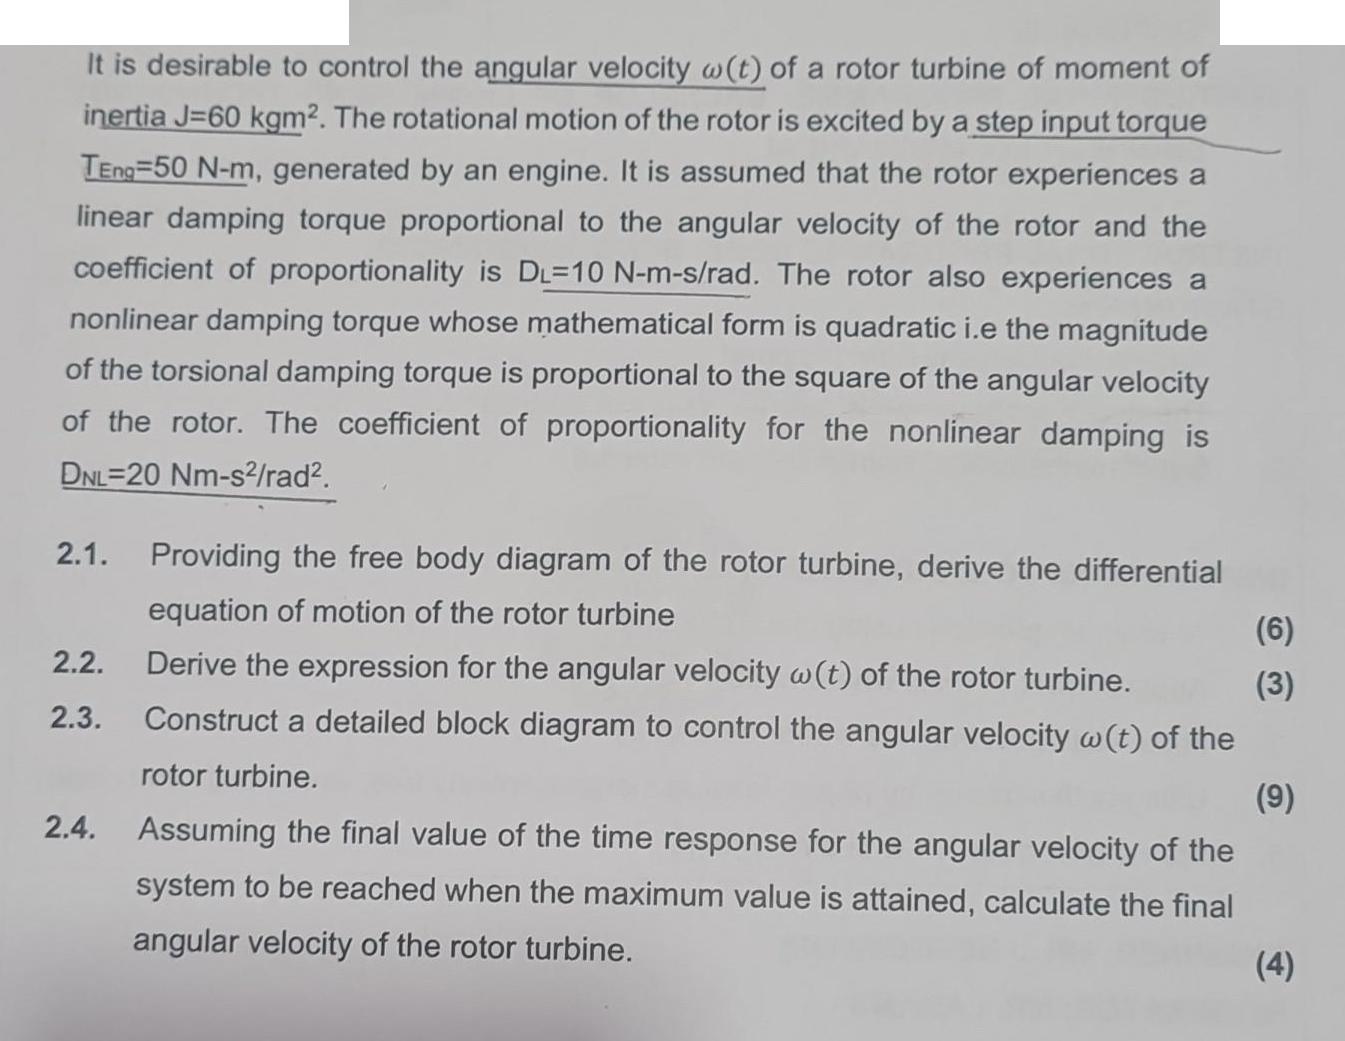 It is desirable to control the angular velocity w(t) of a rotor turbine of moment of inertia J=60 kgm2. The